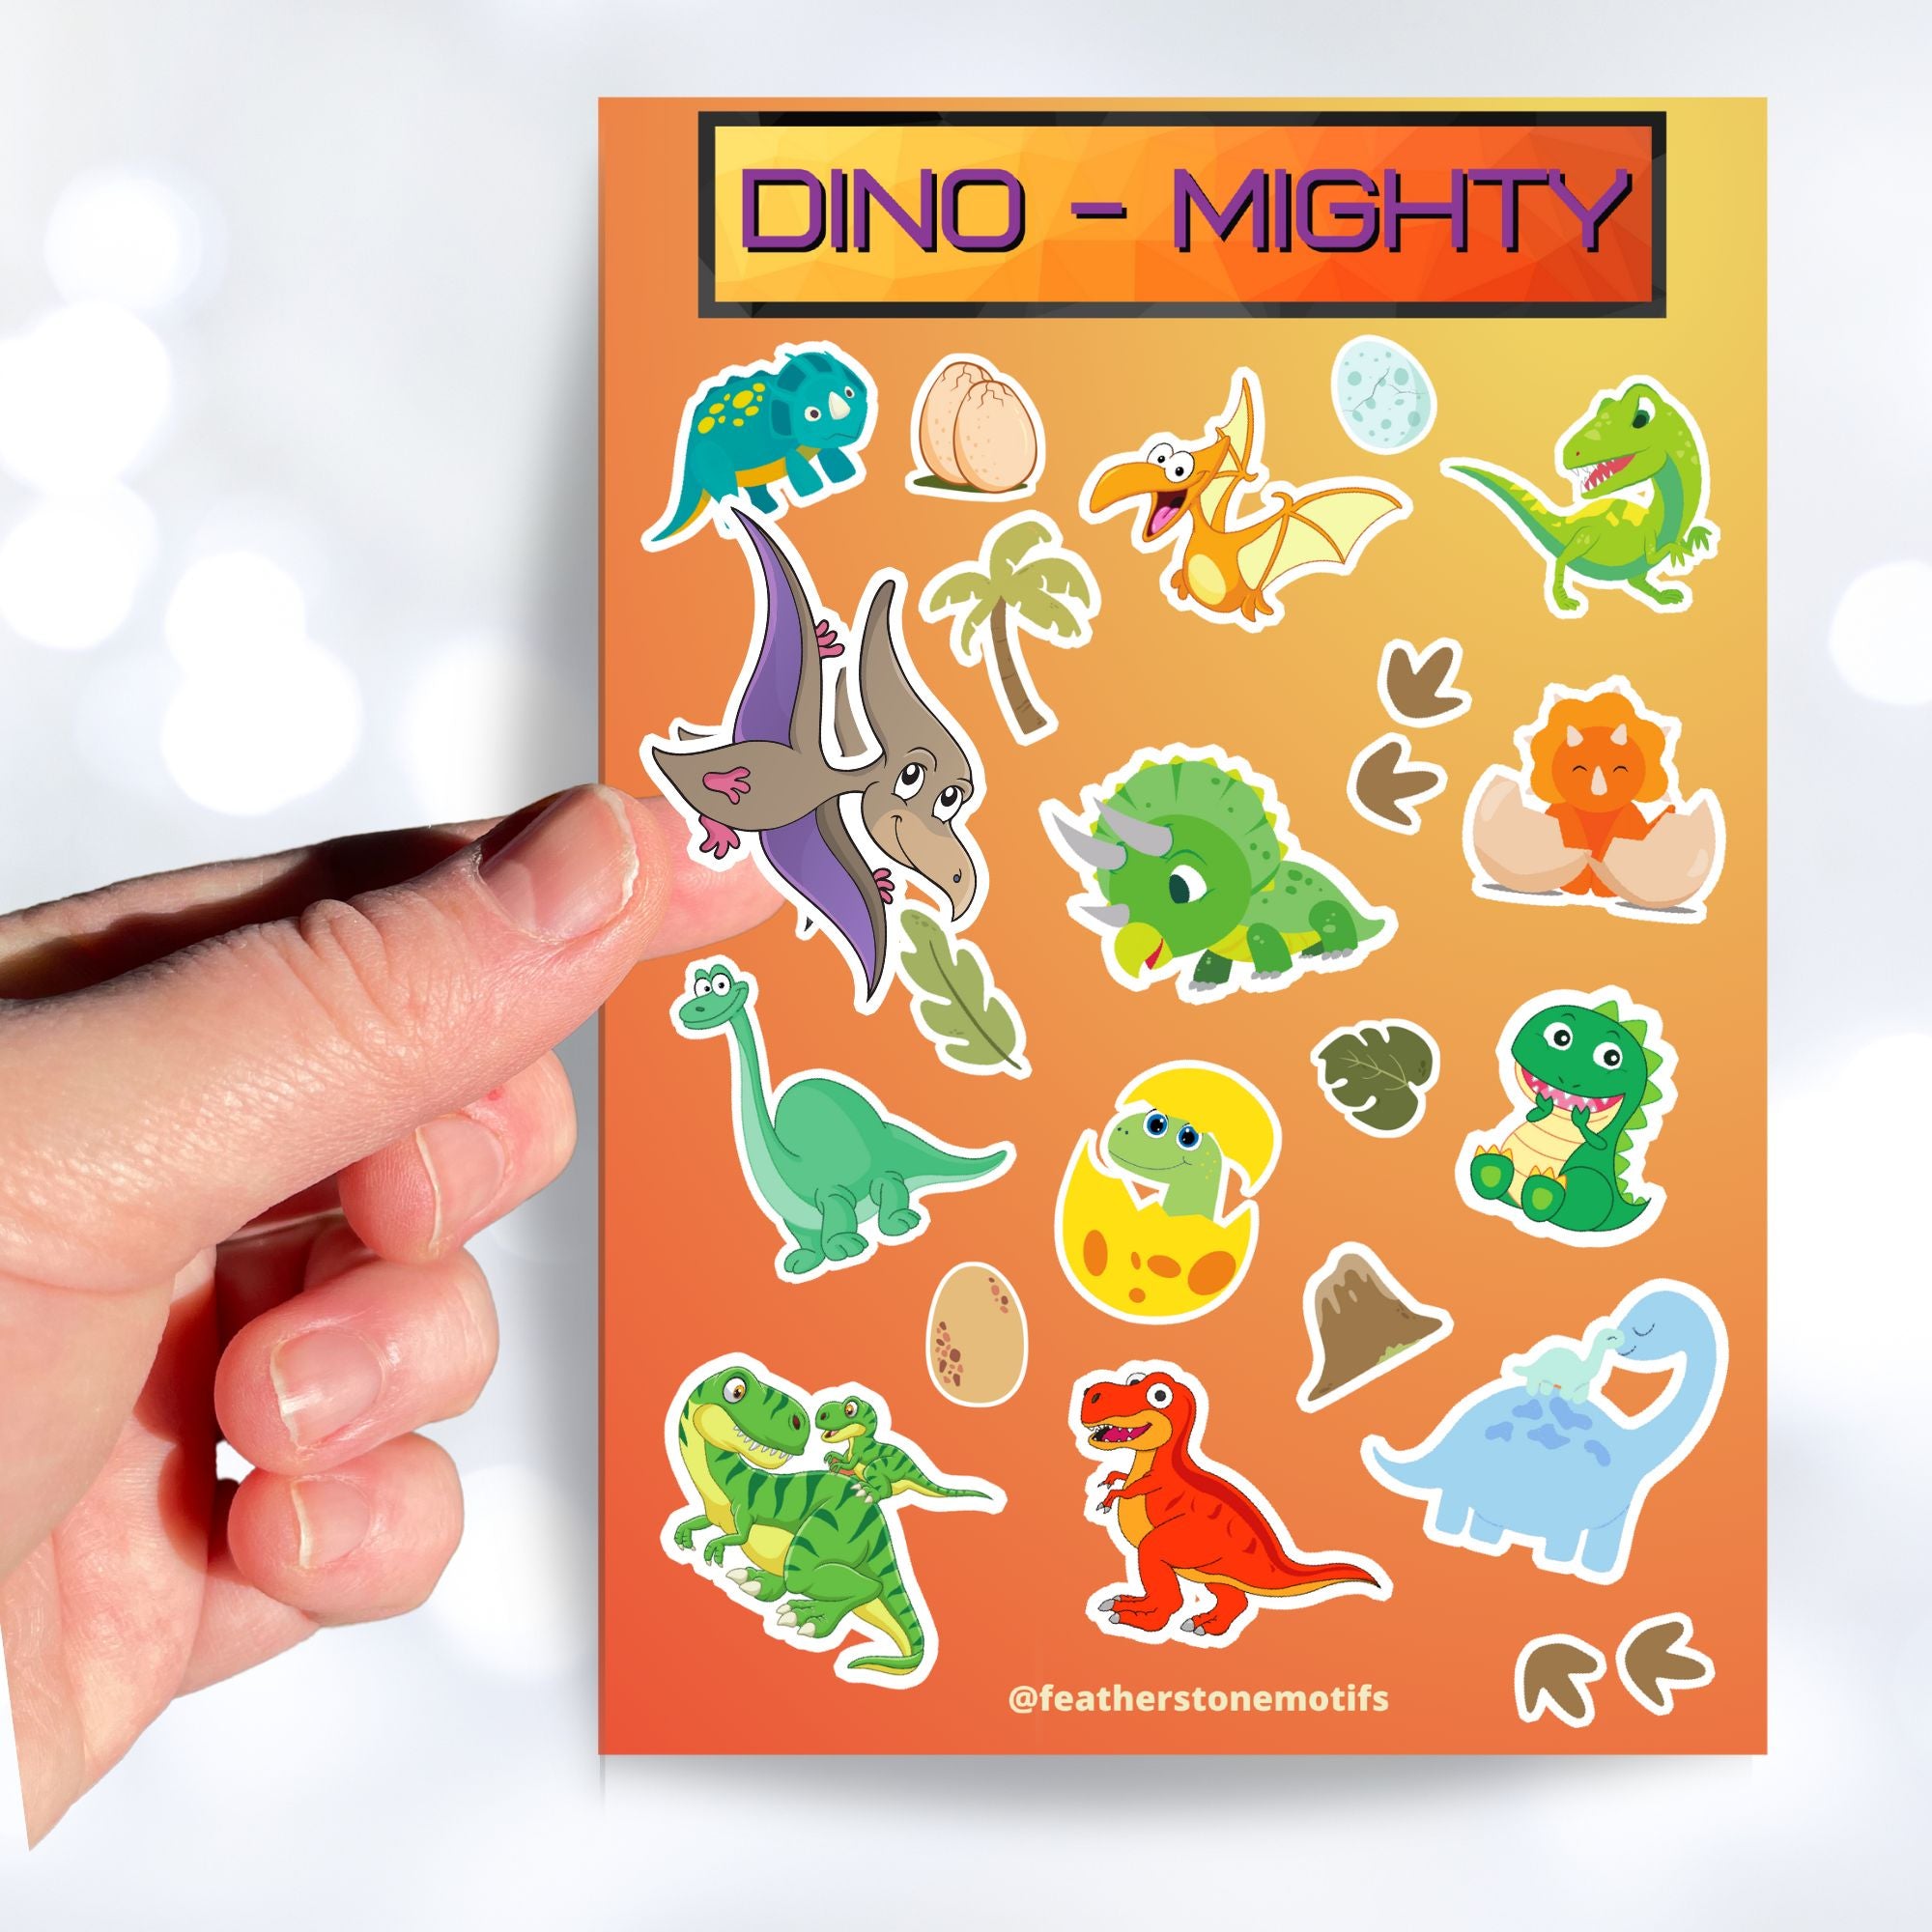 These dinosaur stickers are a-roar-able! This sticker sheet has all of your favorite dinosaurs plus dino eggs, plants, and dino footprints. This image shows a hand holding a tetradactyl sticker over the sticker sheet. 